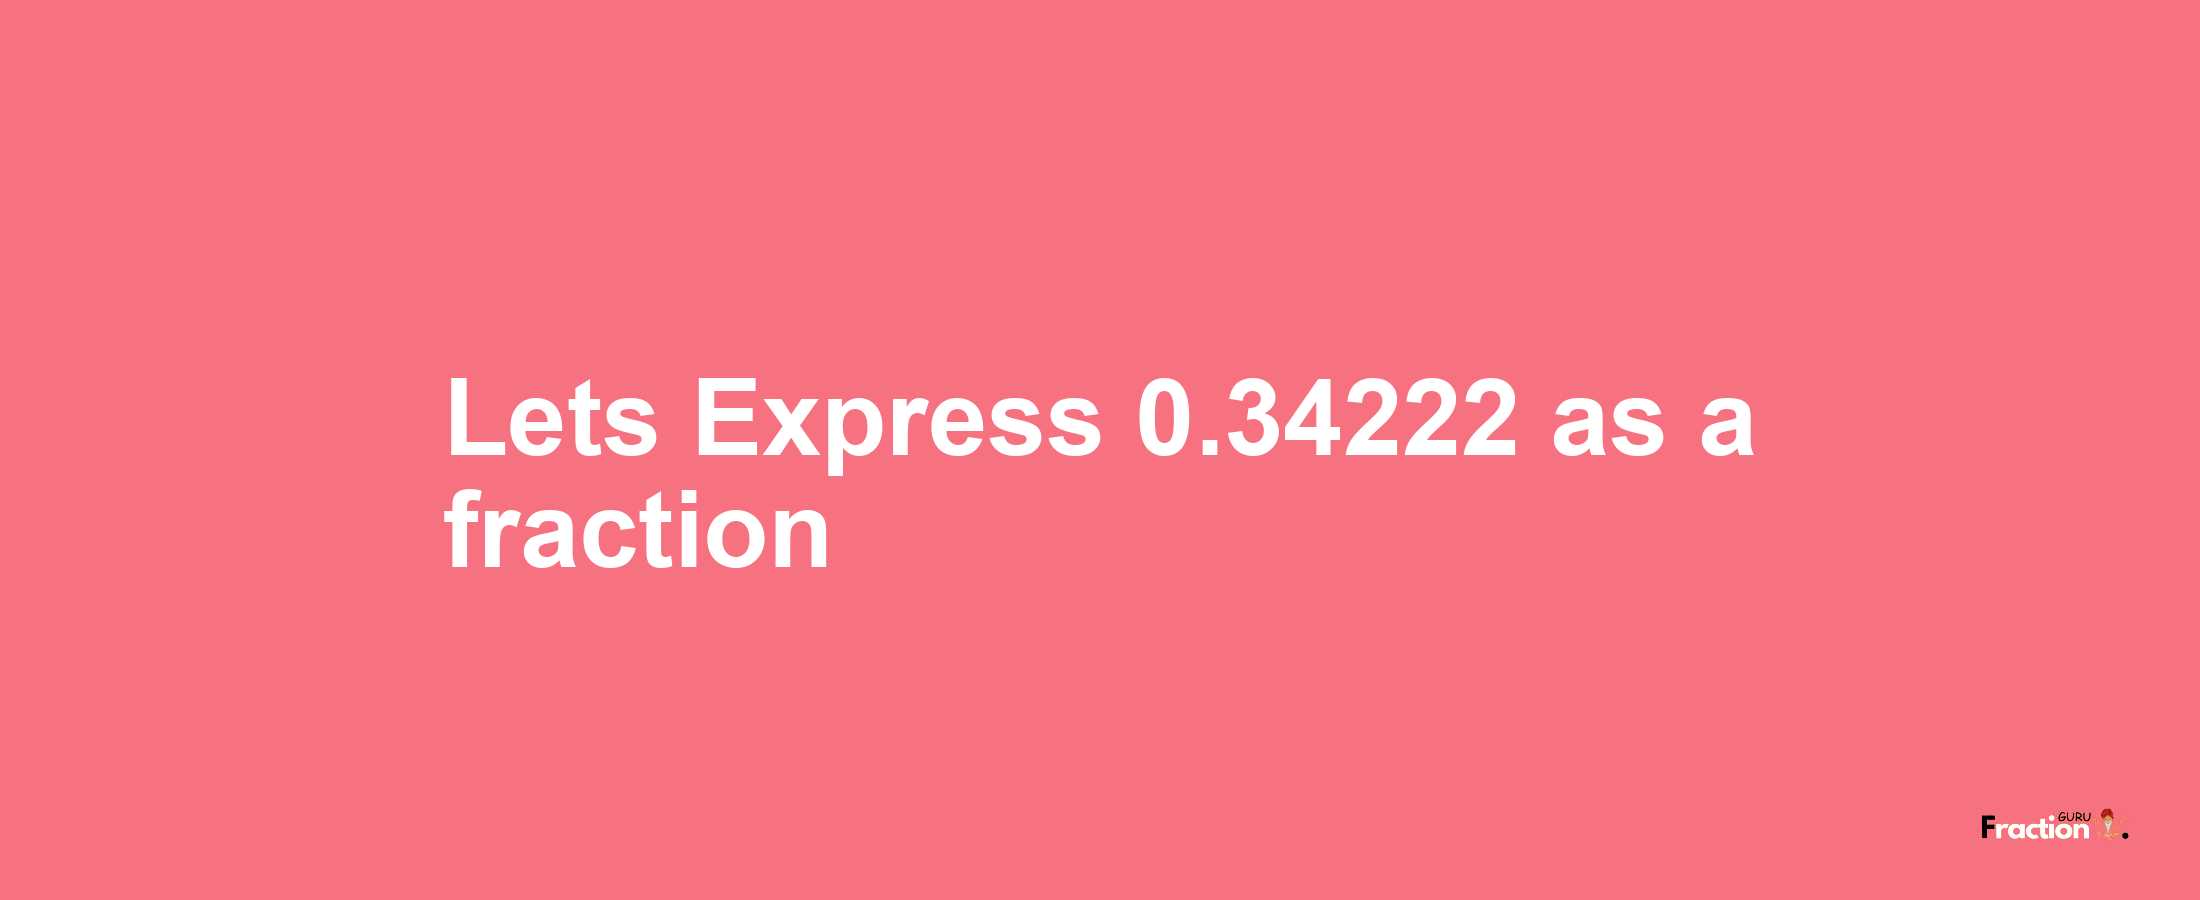 Lets Express 0.34222 as afraction